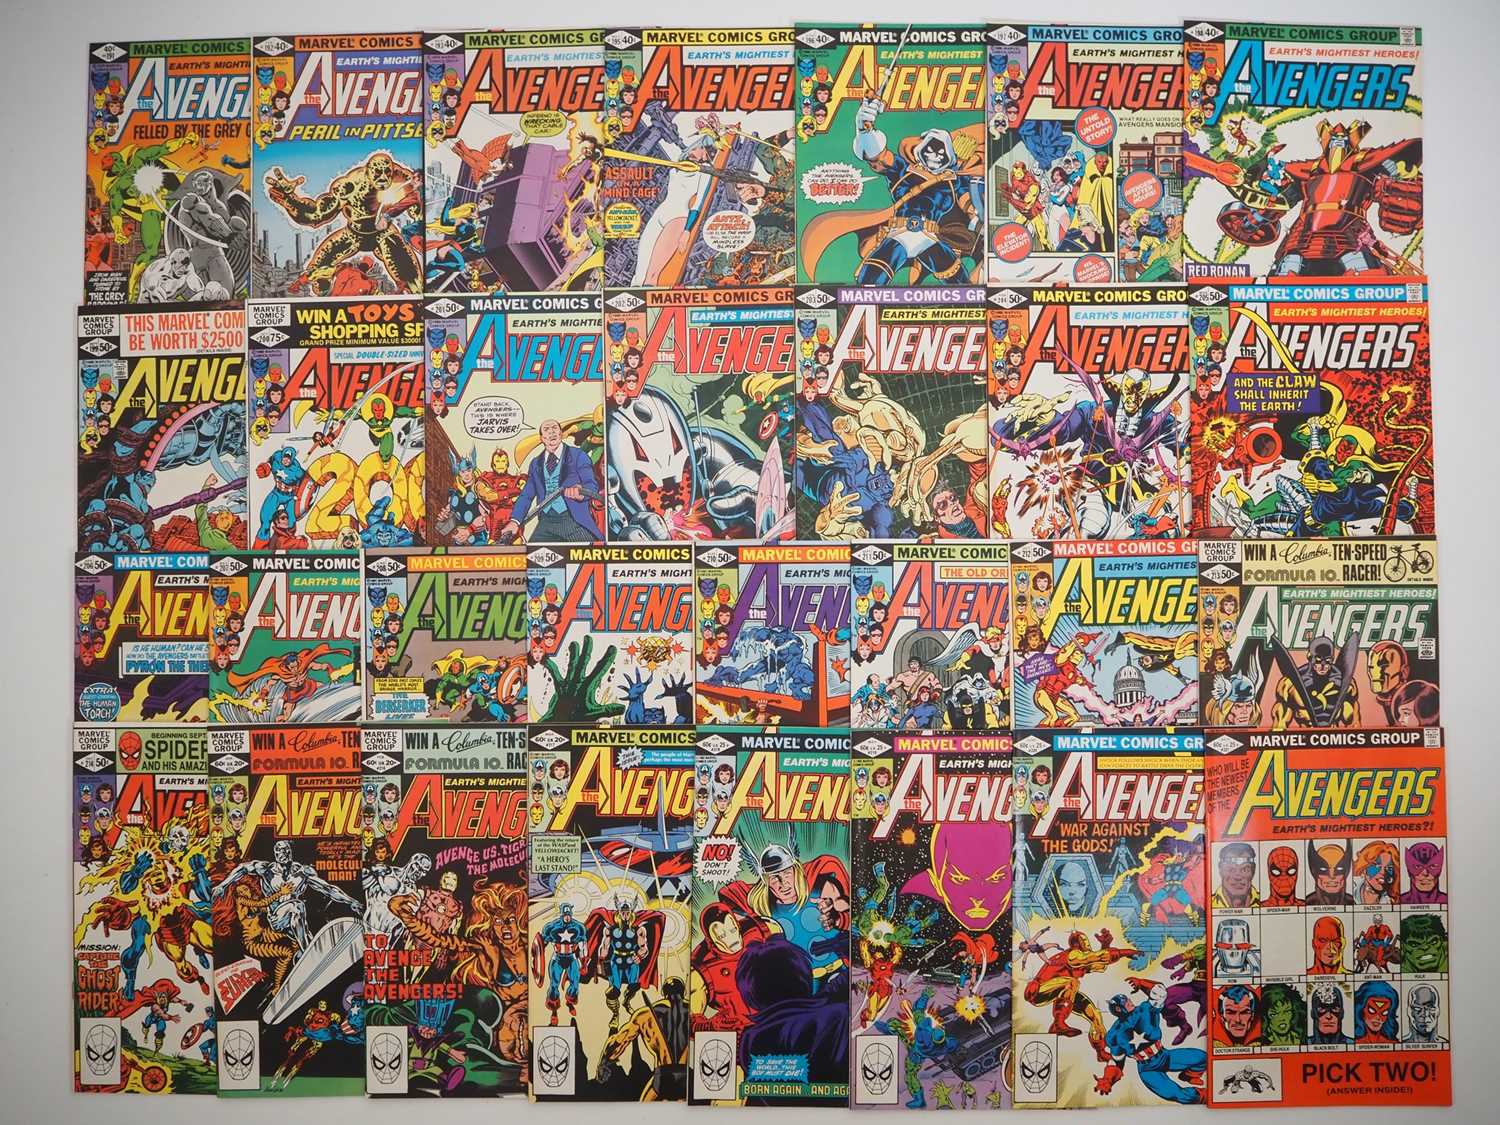 AVENGERS #191 to193, 195 to 221 (30 in Lot) - (1980/1982 - MARVEL) - Includes the first cameo and